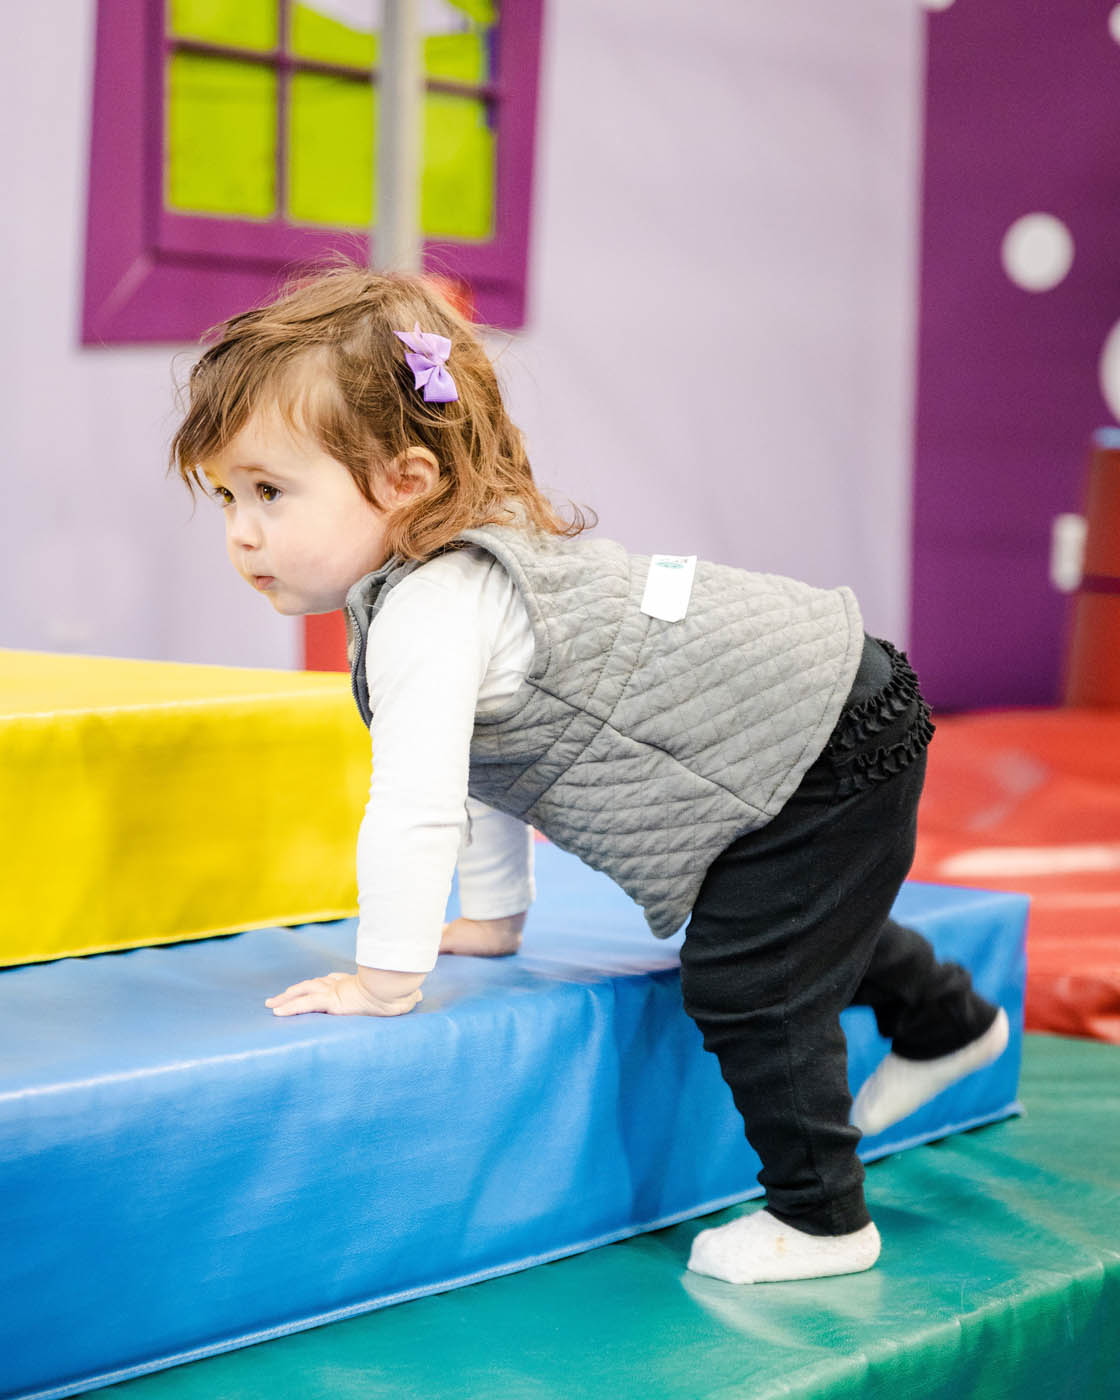 A little girl climbing on soft tumbling equipment for toddlers at Romp n' Roll in Pittsburgh, PA.